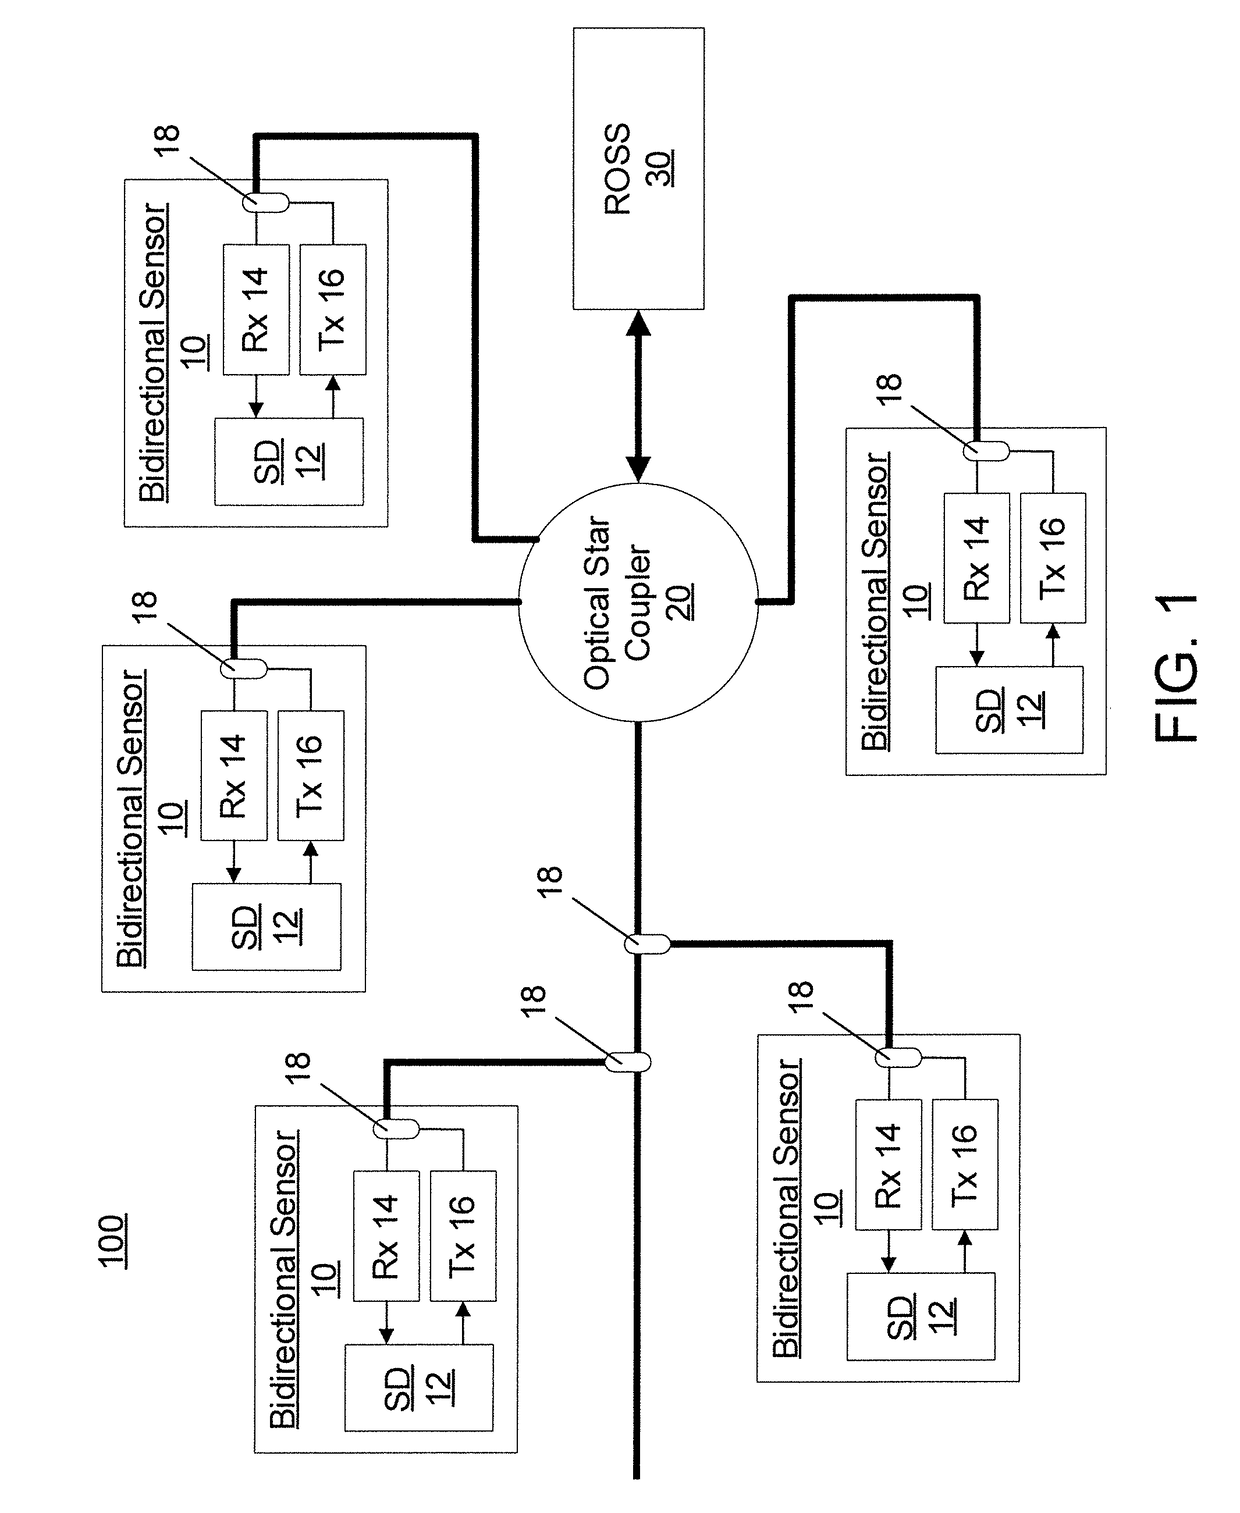 Optically-secured adaptive software-defined optical sensor network architecture